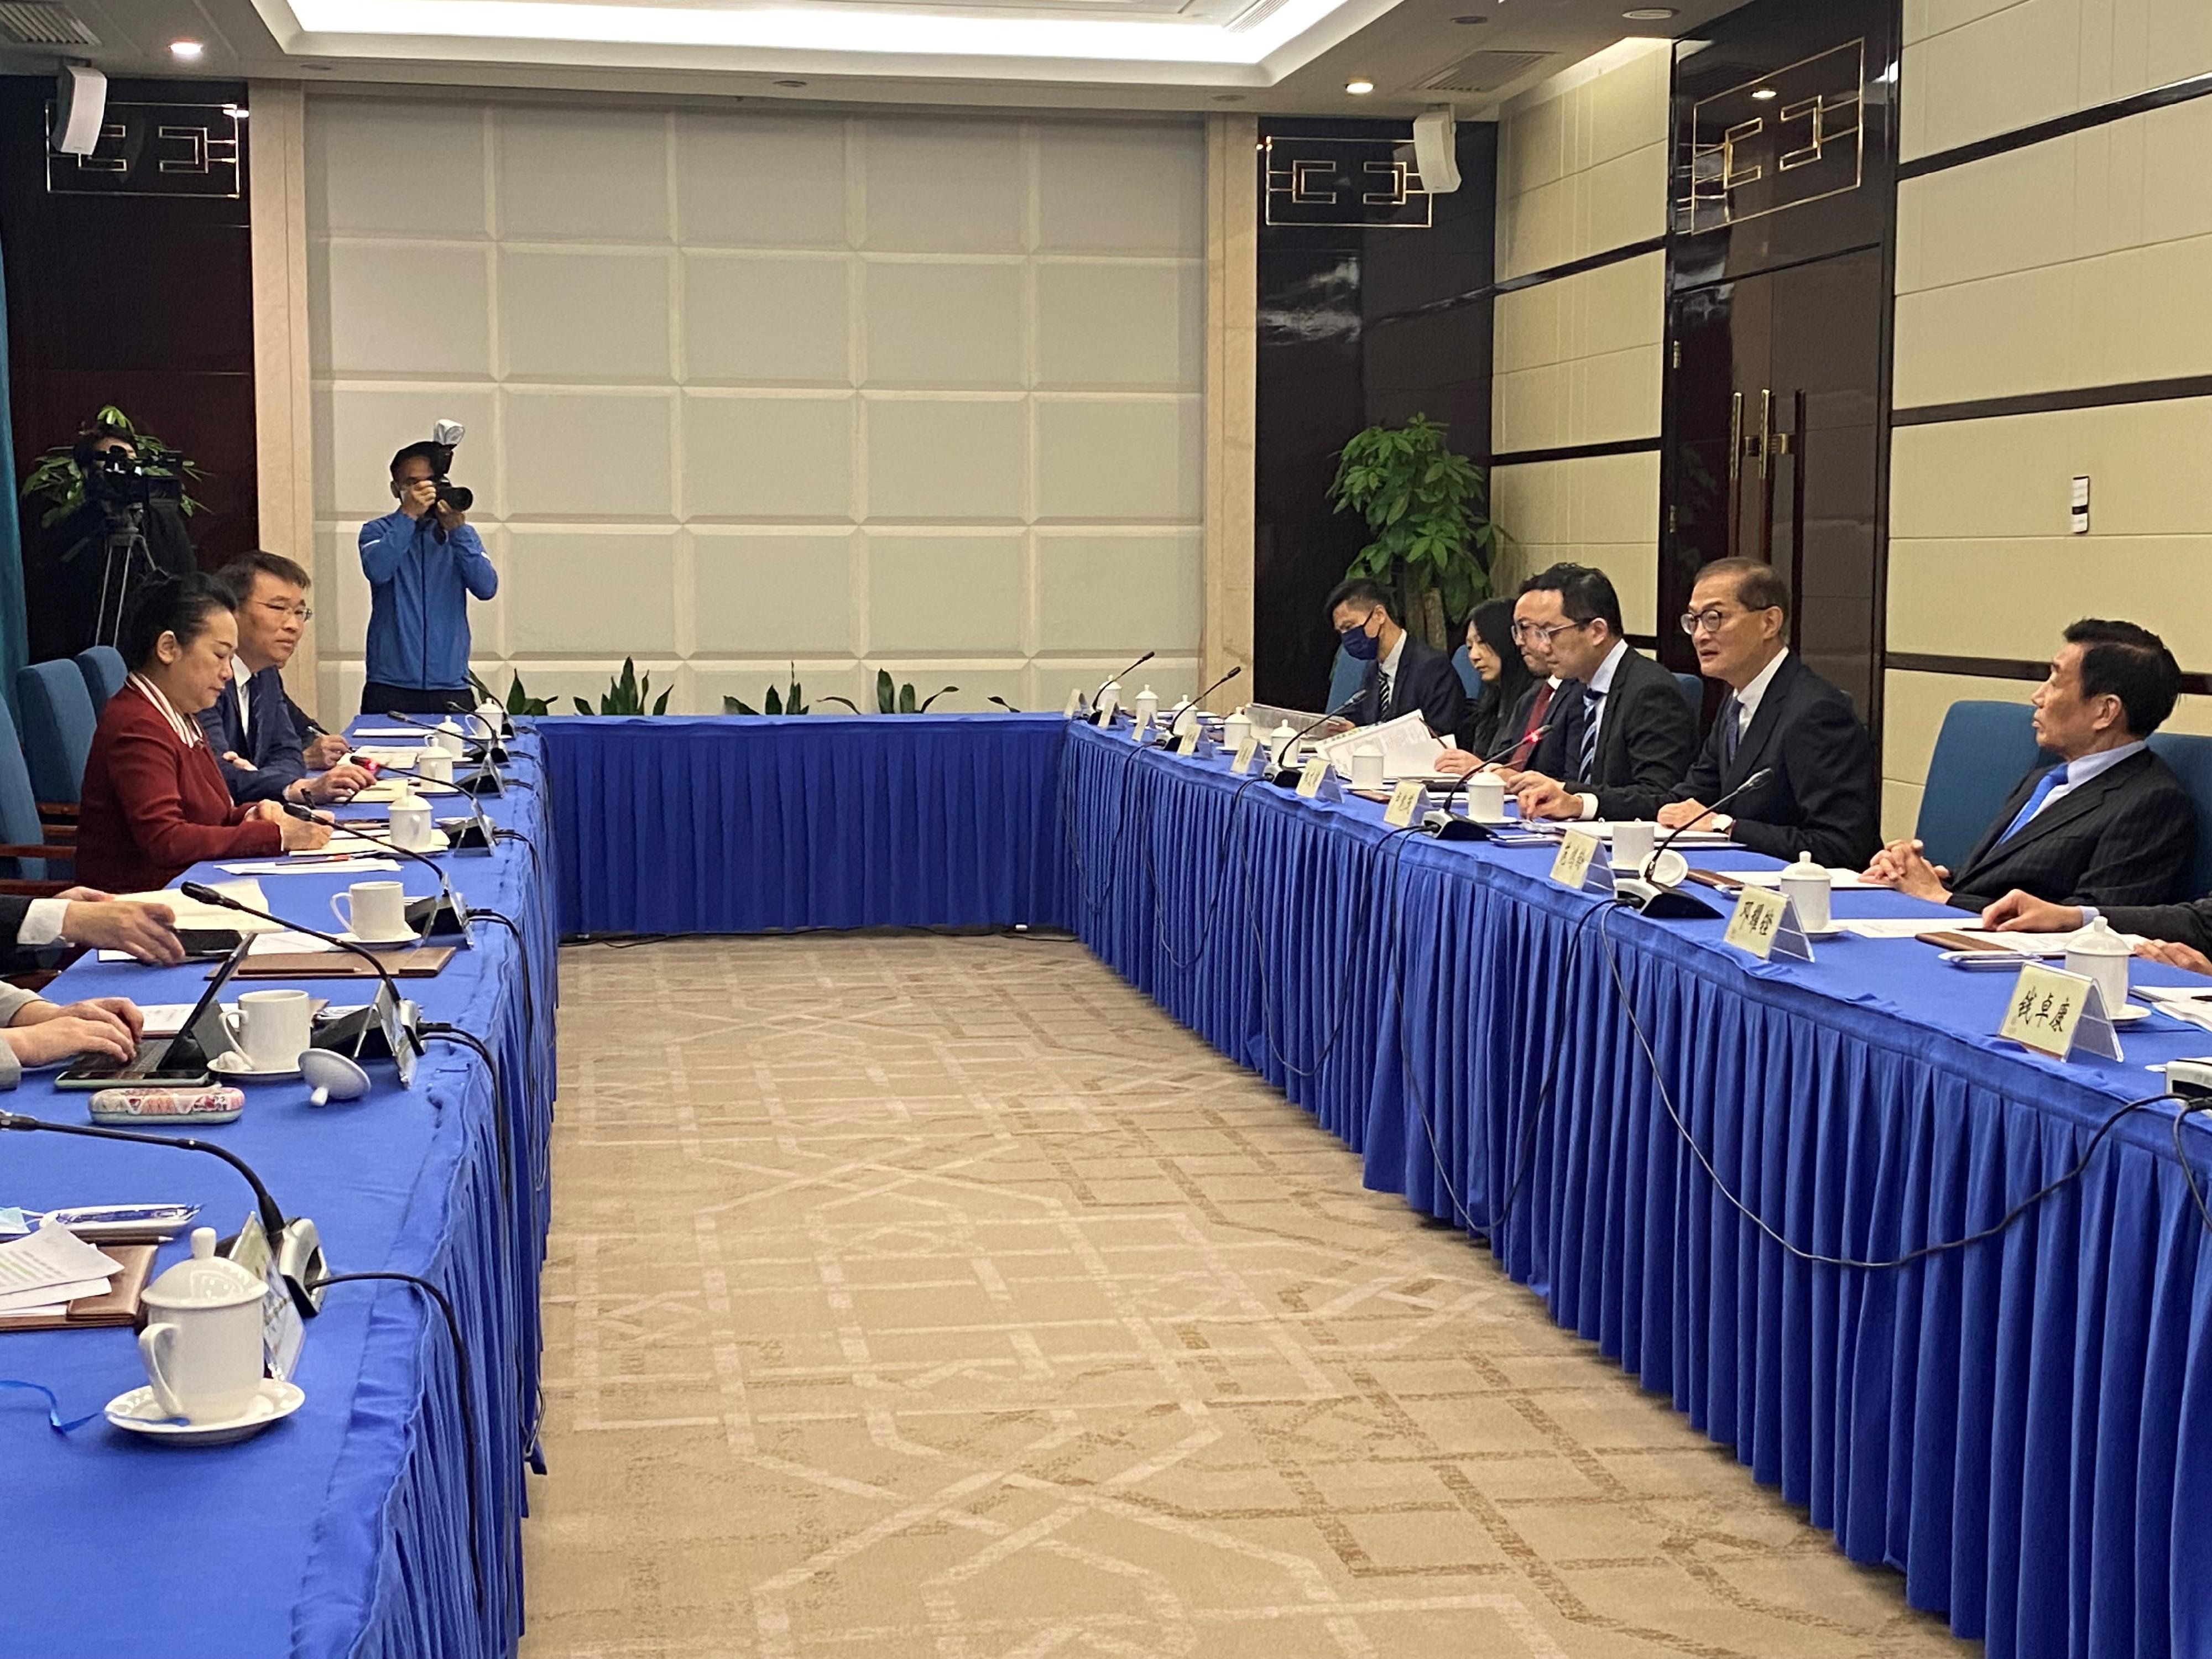 The Secretary for Health, Professor Lo Chung-mau, led his delegation to call on the Shenzhen Municipal Health Commission today (March 30). Photo shows Professor Lo (second right); the Director of Health, Dr Ronald Lam (third right); and the Chairman of the Hospital Authority, Mr Henry Fan (first right), meeting with the Director General of the Shenzhen Municipal Health Commission, Ms Wu Hongyan (first left).